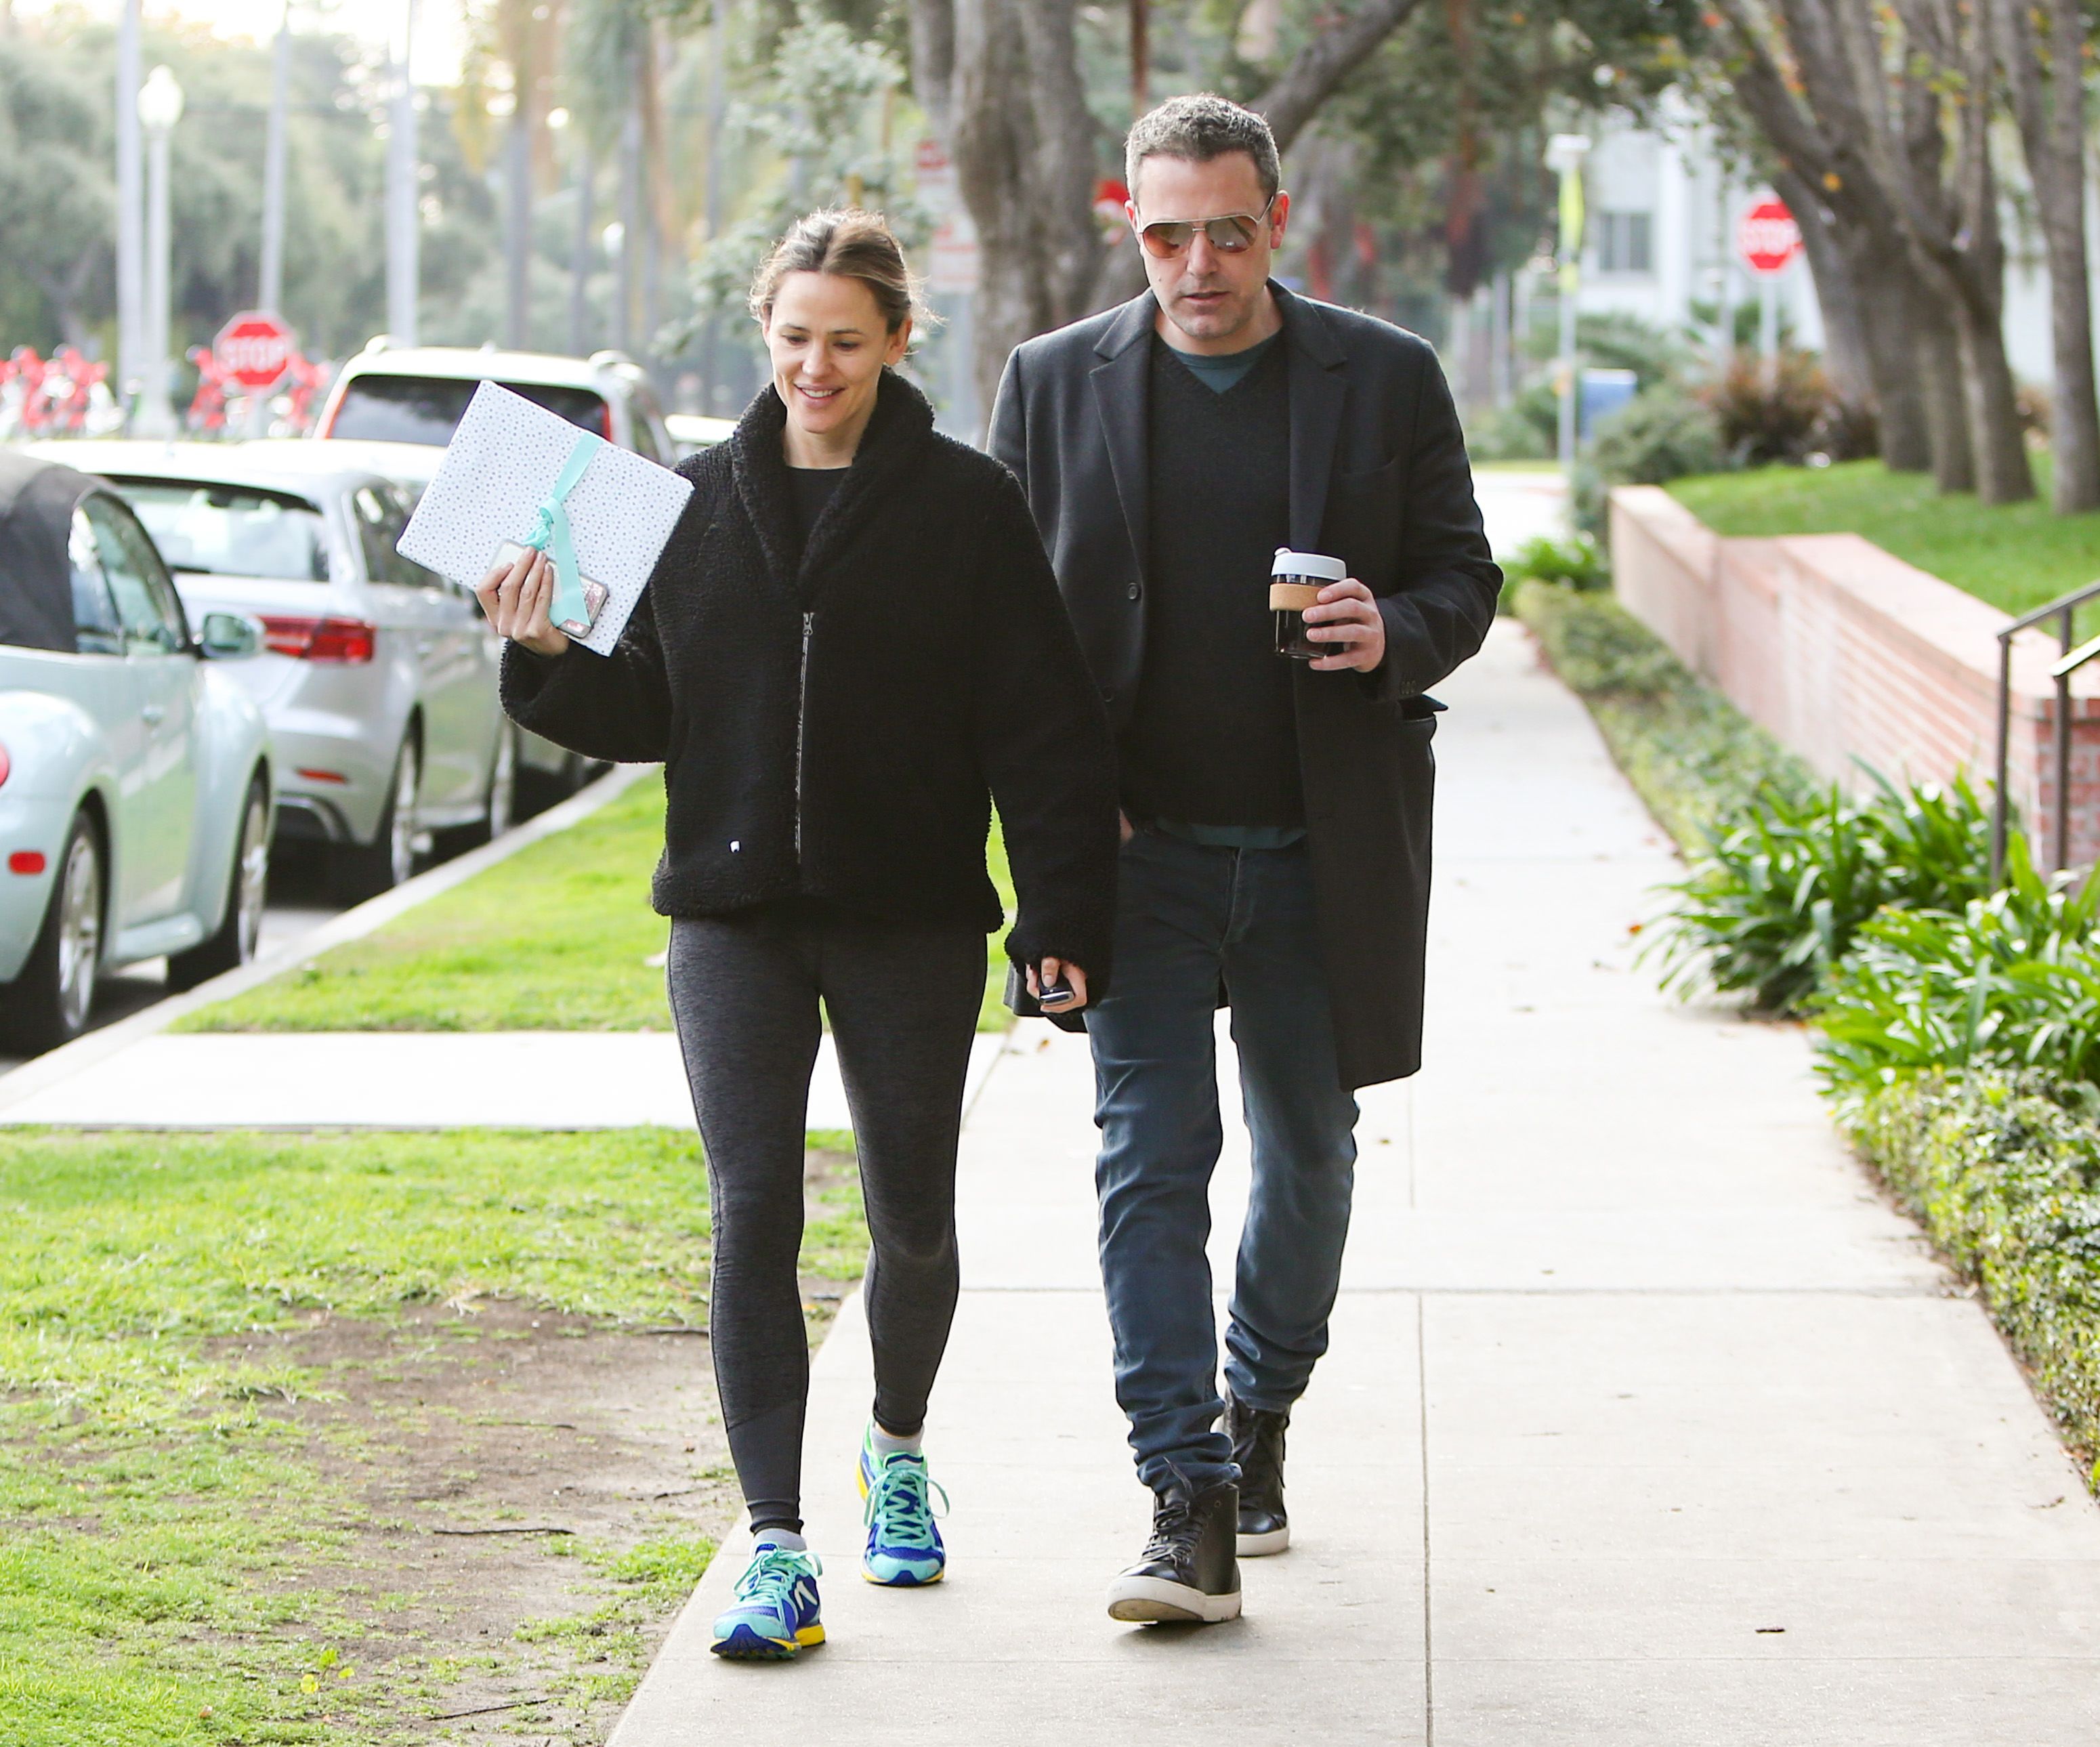 Jennifer Garner and Ben Affleck are seen on February 27, 2019 in Los Angeles, California. | Photo: Getty Images